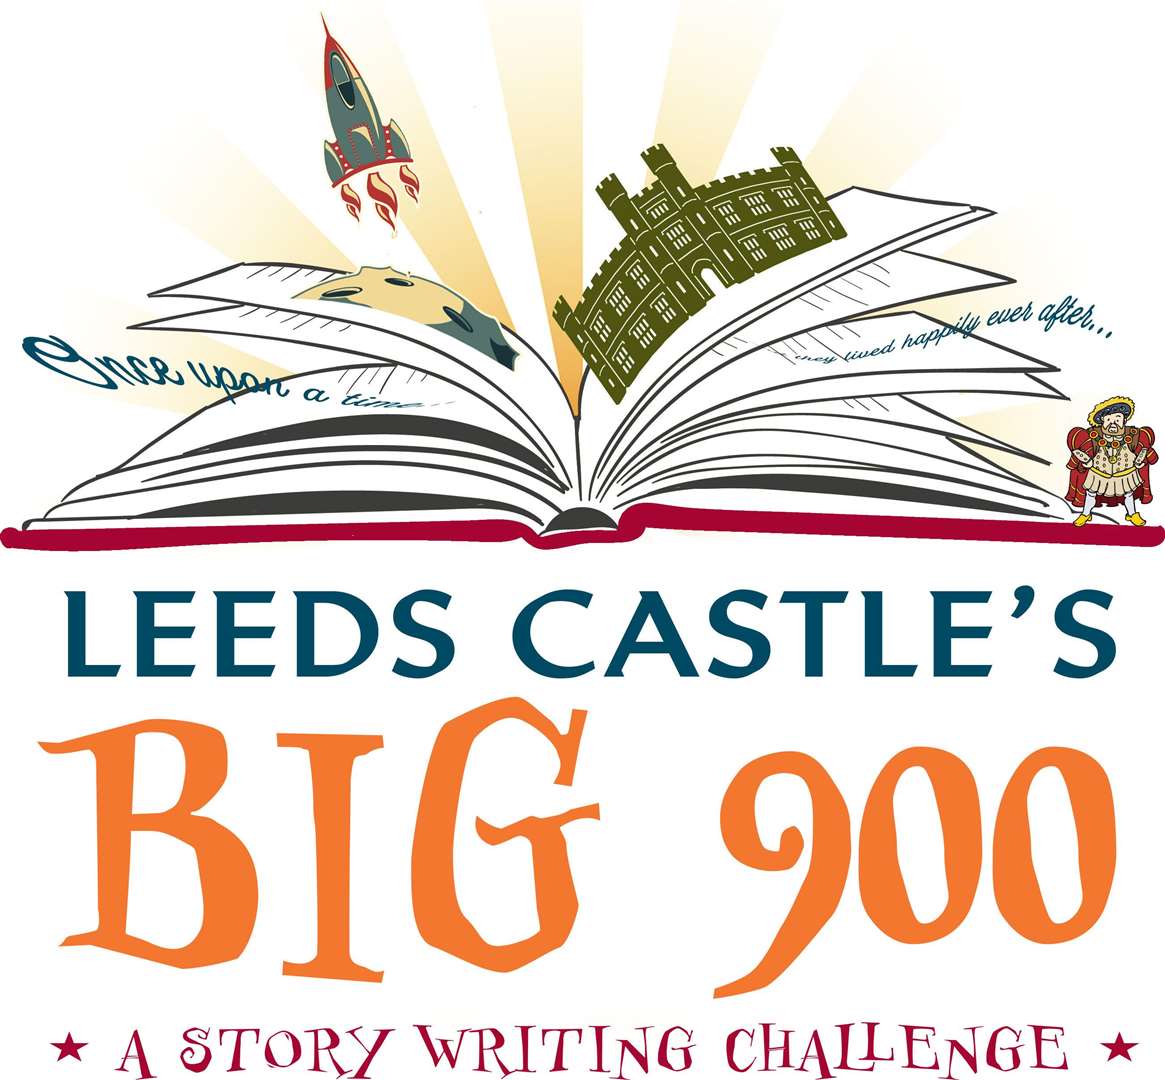 Children from all over the UK can take part in the Leeds Castle’s ‘Big 900’ Story Writing Challenge.